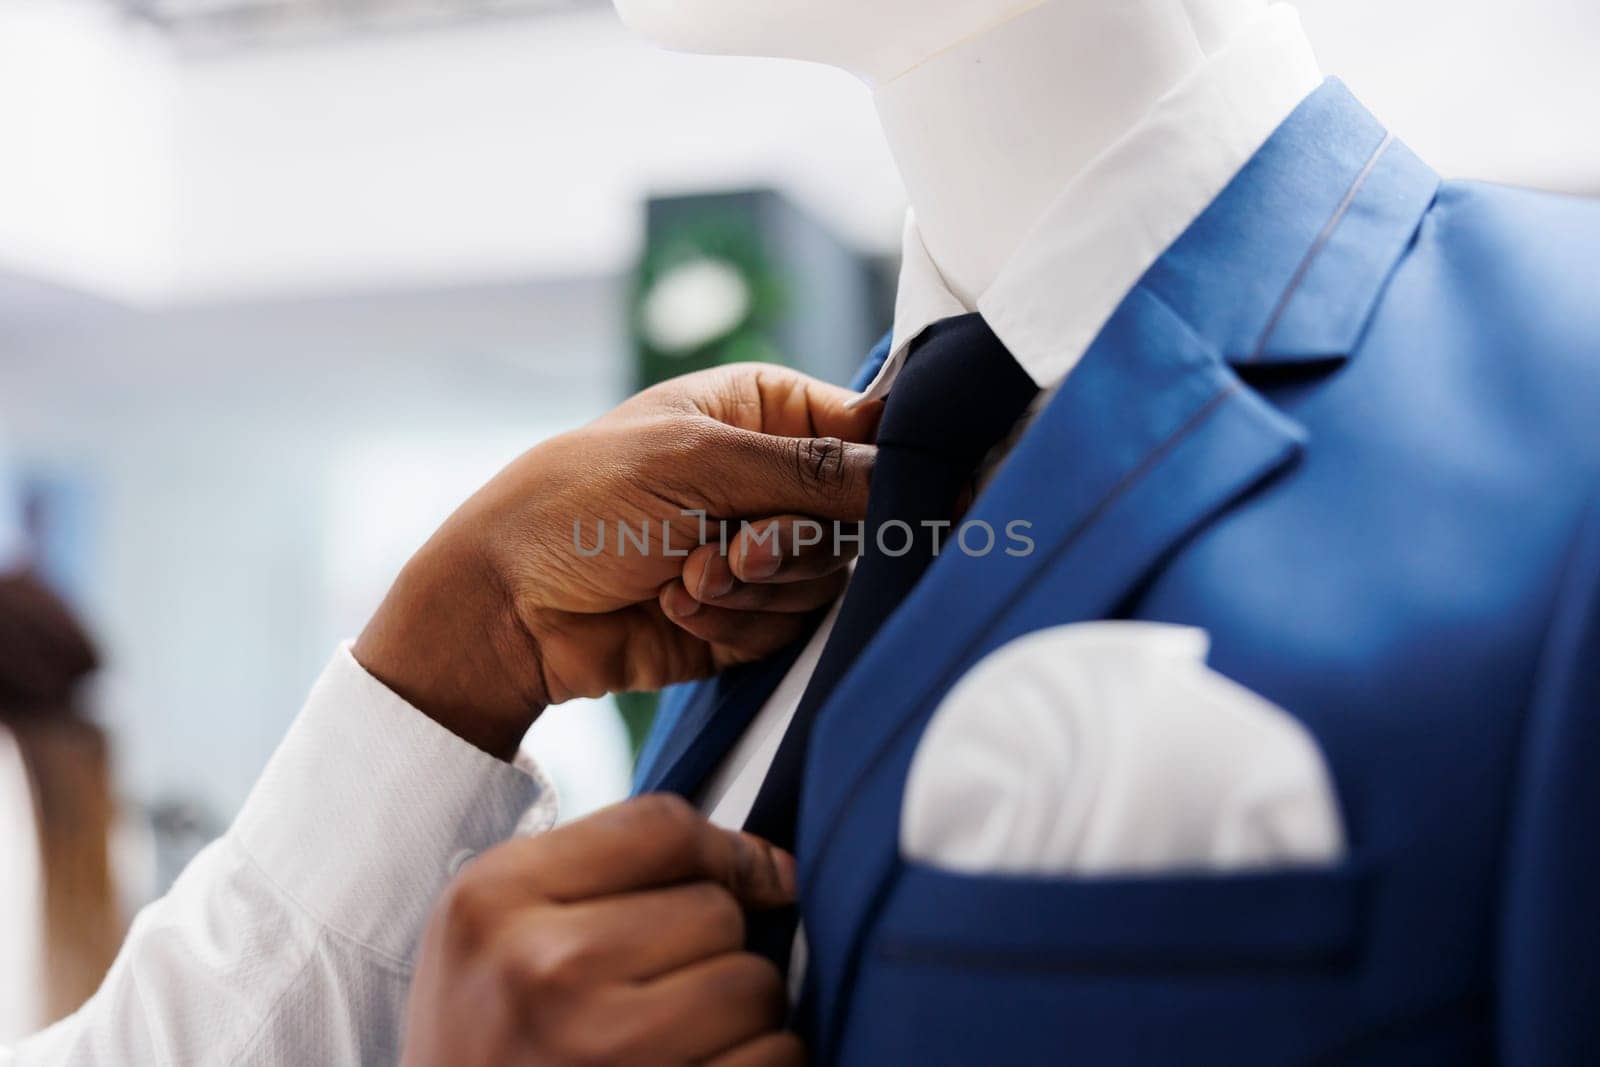 Fashion boutique stylist hands fixing tie and creating formal look on mannequin. African american arms dressing model in suit to display menswear brand in department shopping mall